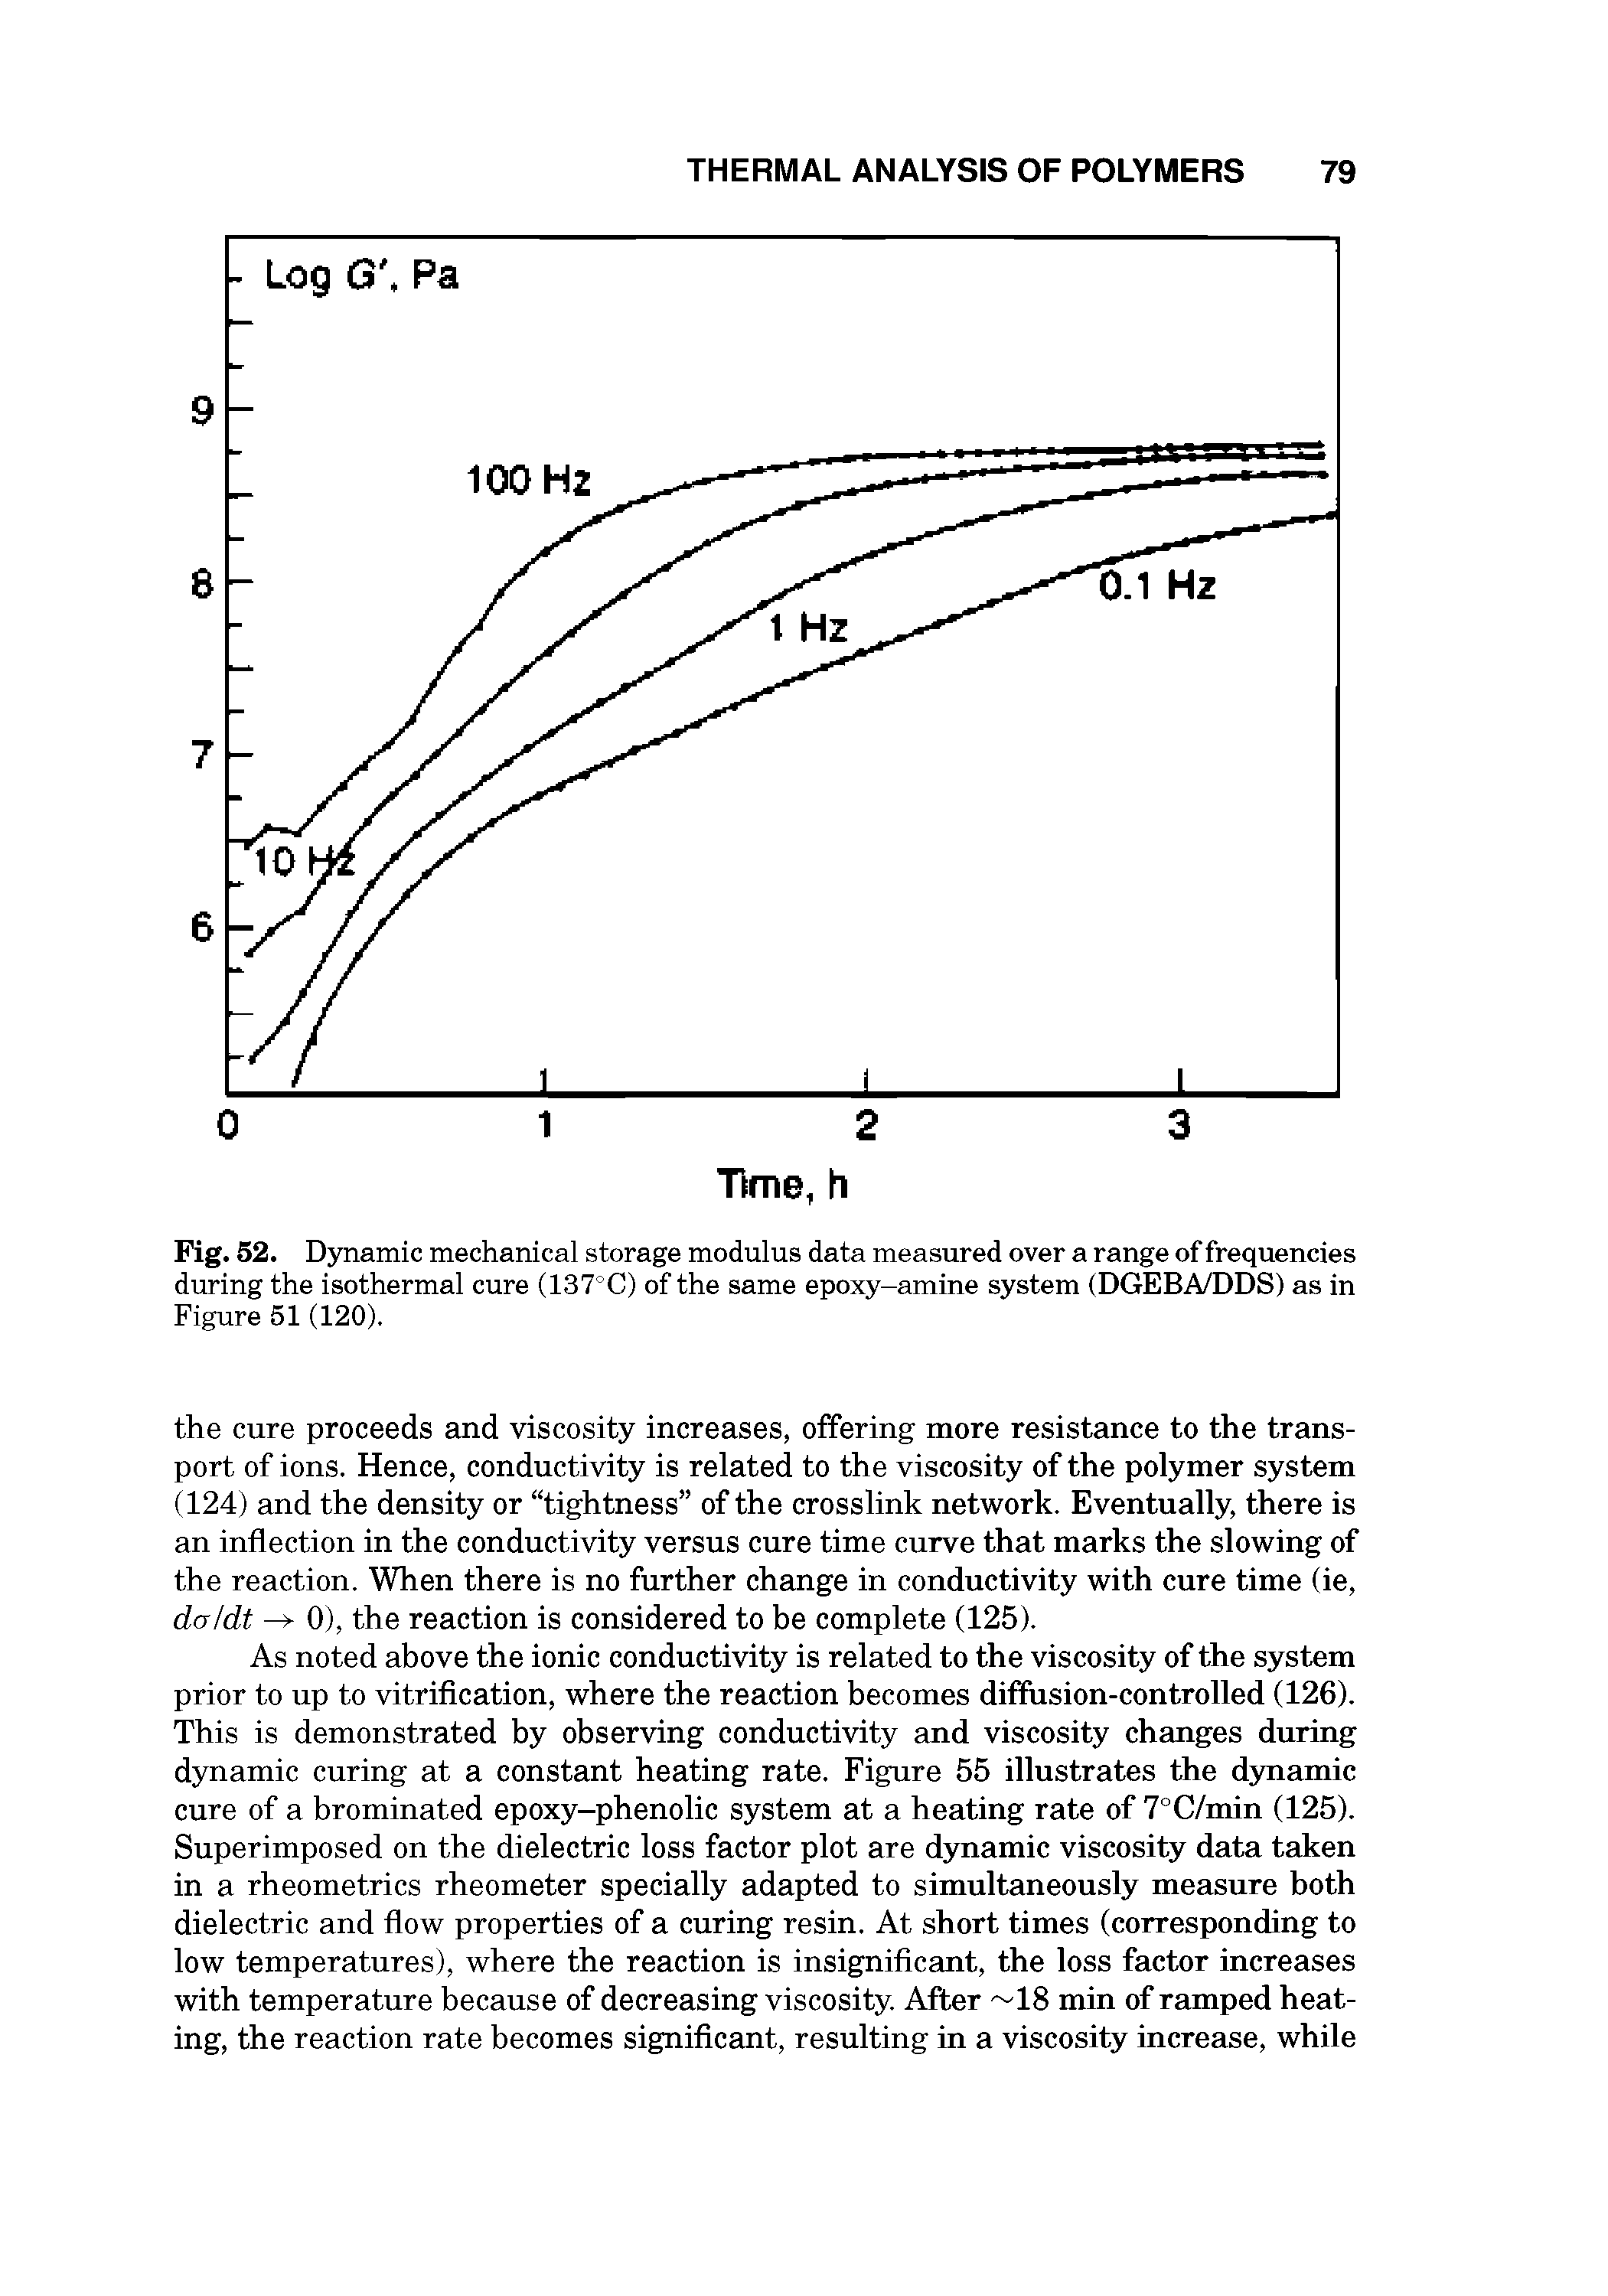 Fig. 52. Dynamic mechanical storage modulus data measured over a range of frequencies during the isothermal cure (137°C) of the same epoxy-amine system (DGEBA/DDS) as in Figure 51 (120).